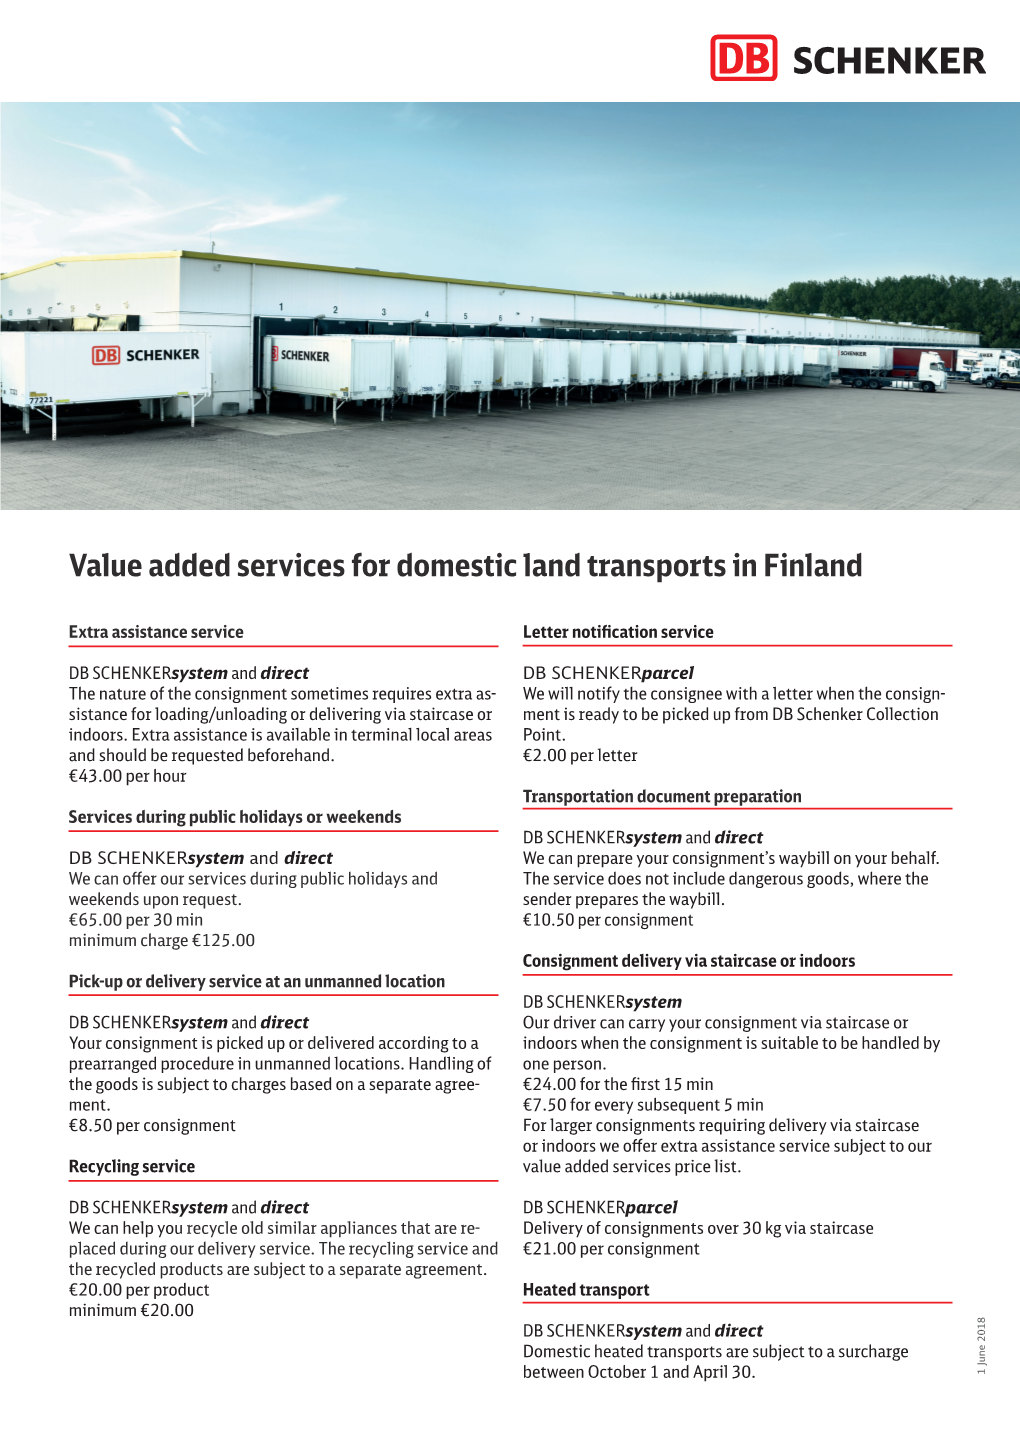 Value Added Services for Domestic Land Transports in Finland